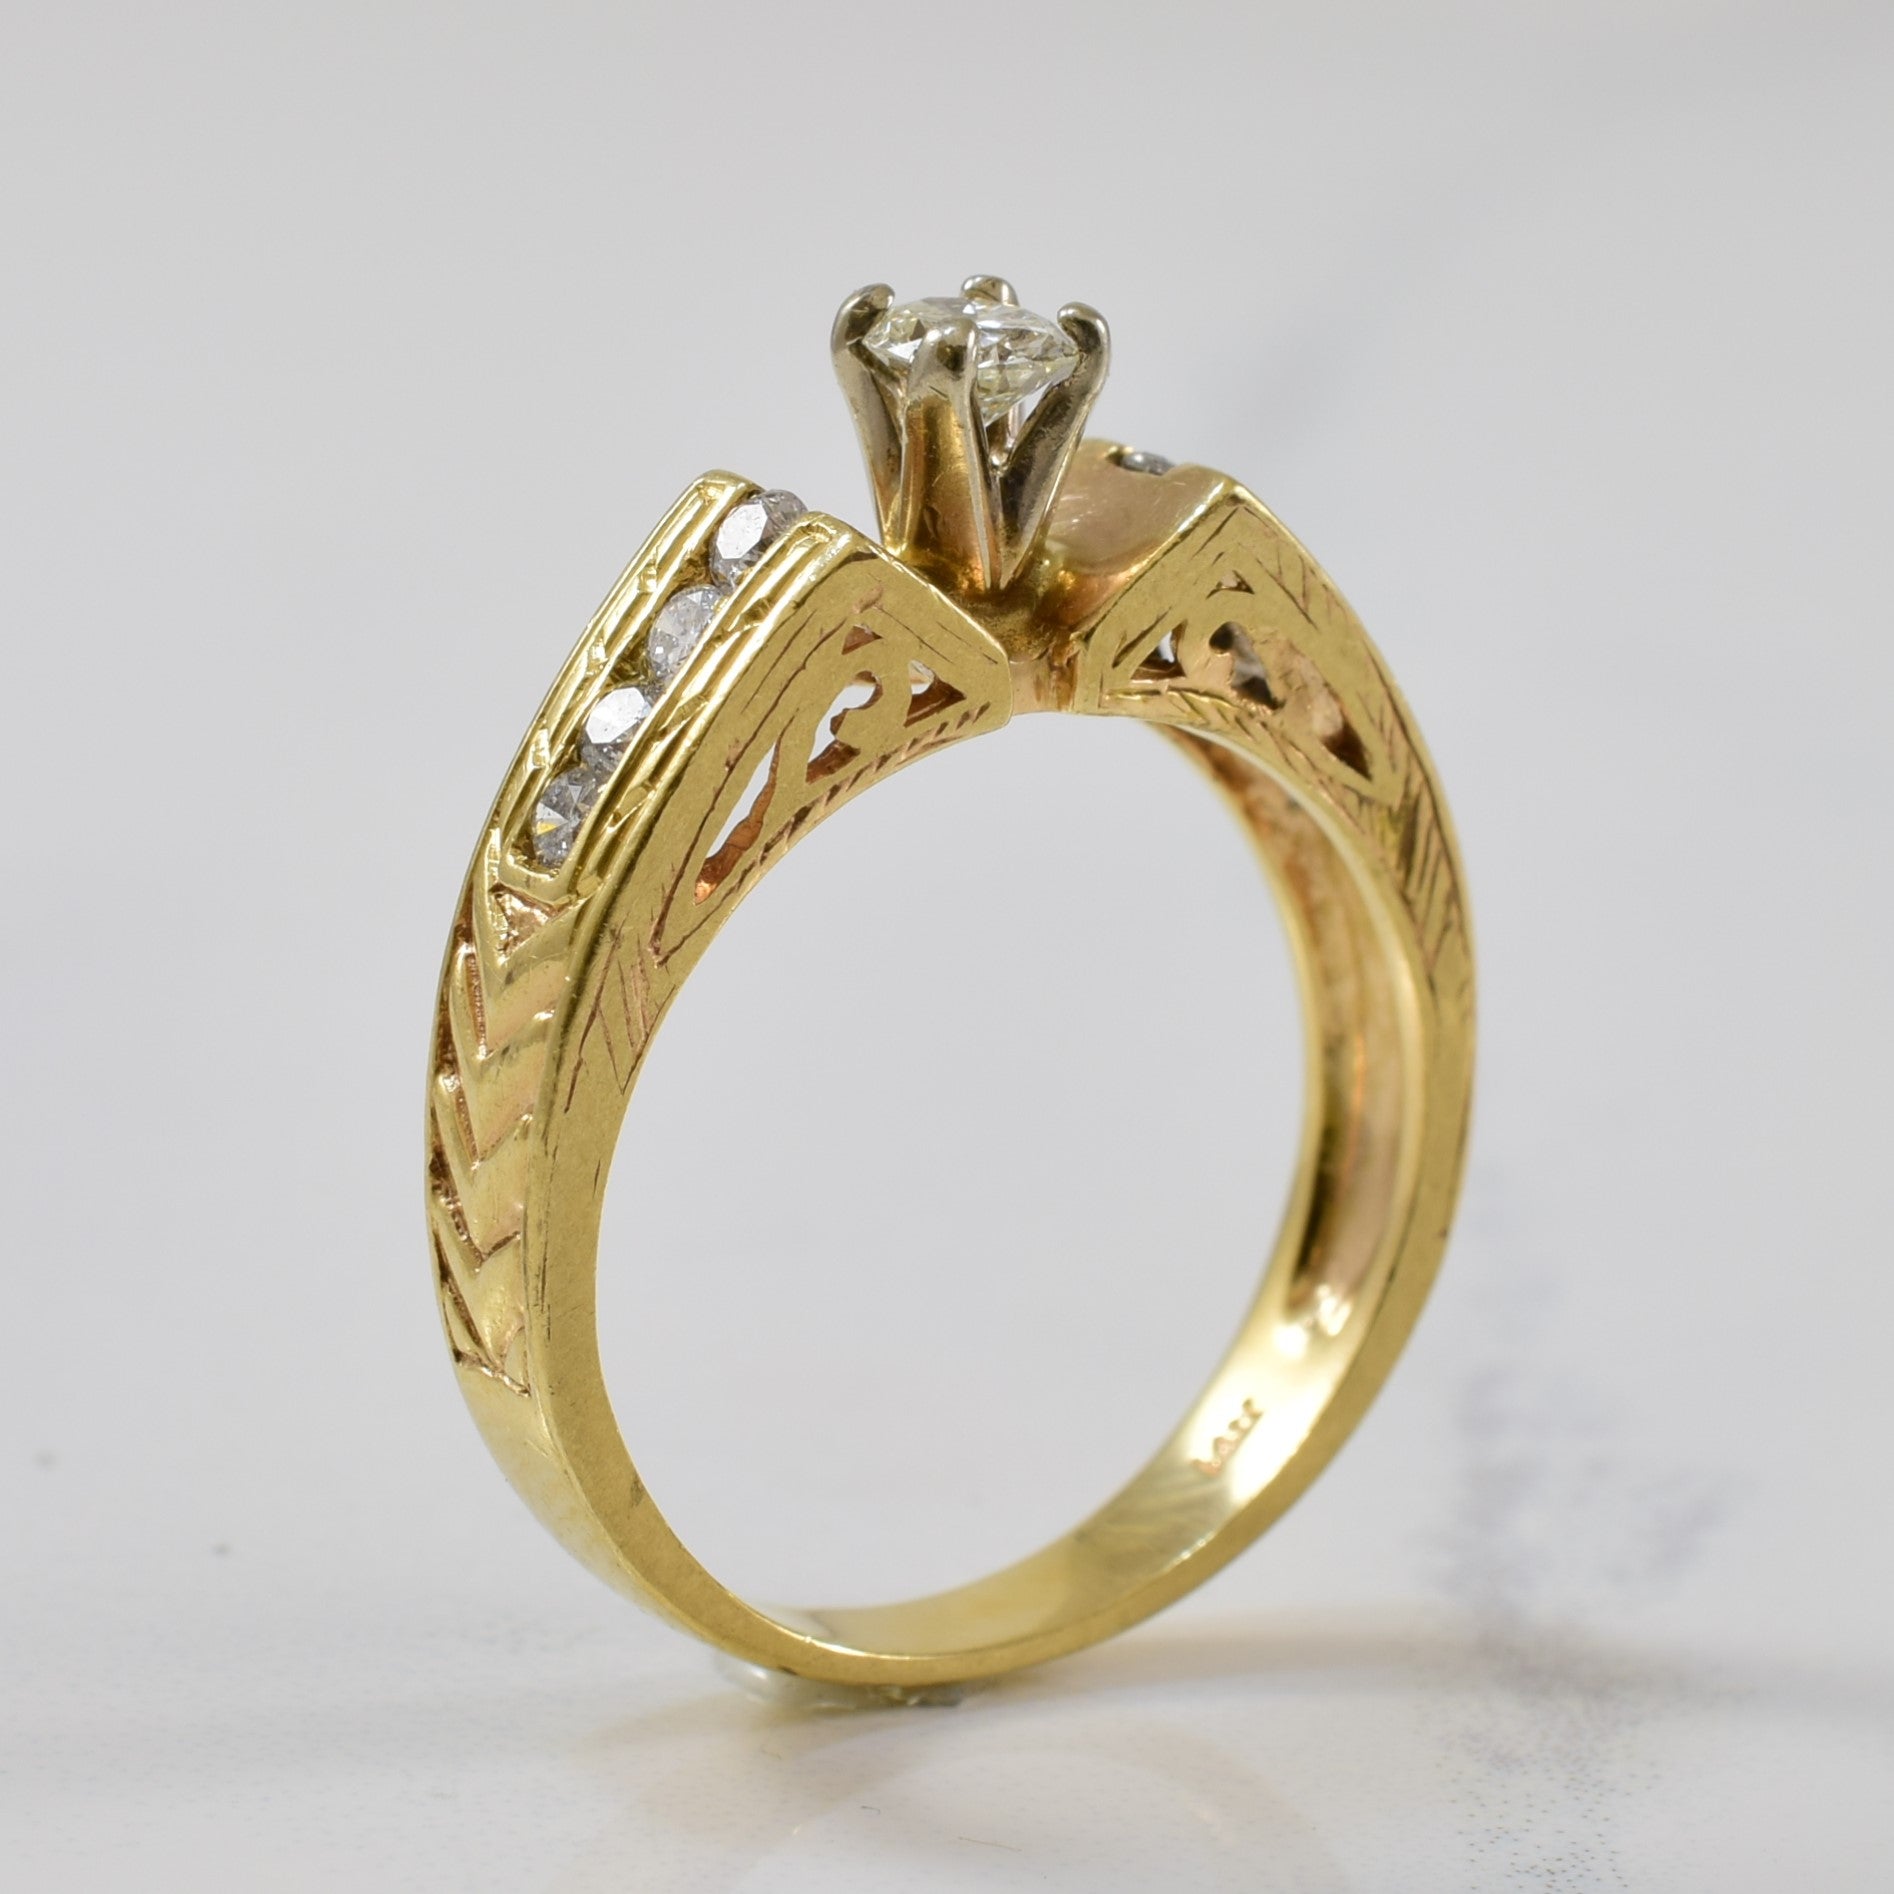 High Set Oval Diamond Cathedral Ring | 0.43ctw | SZ 7.25 |